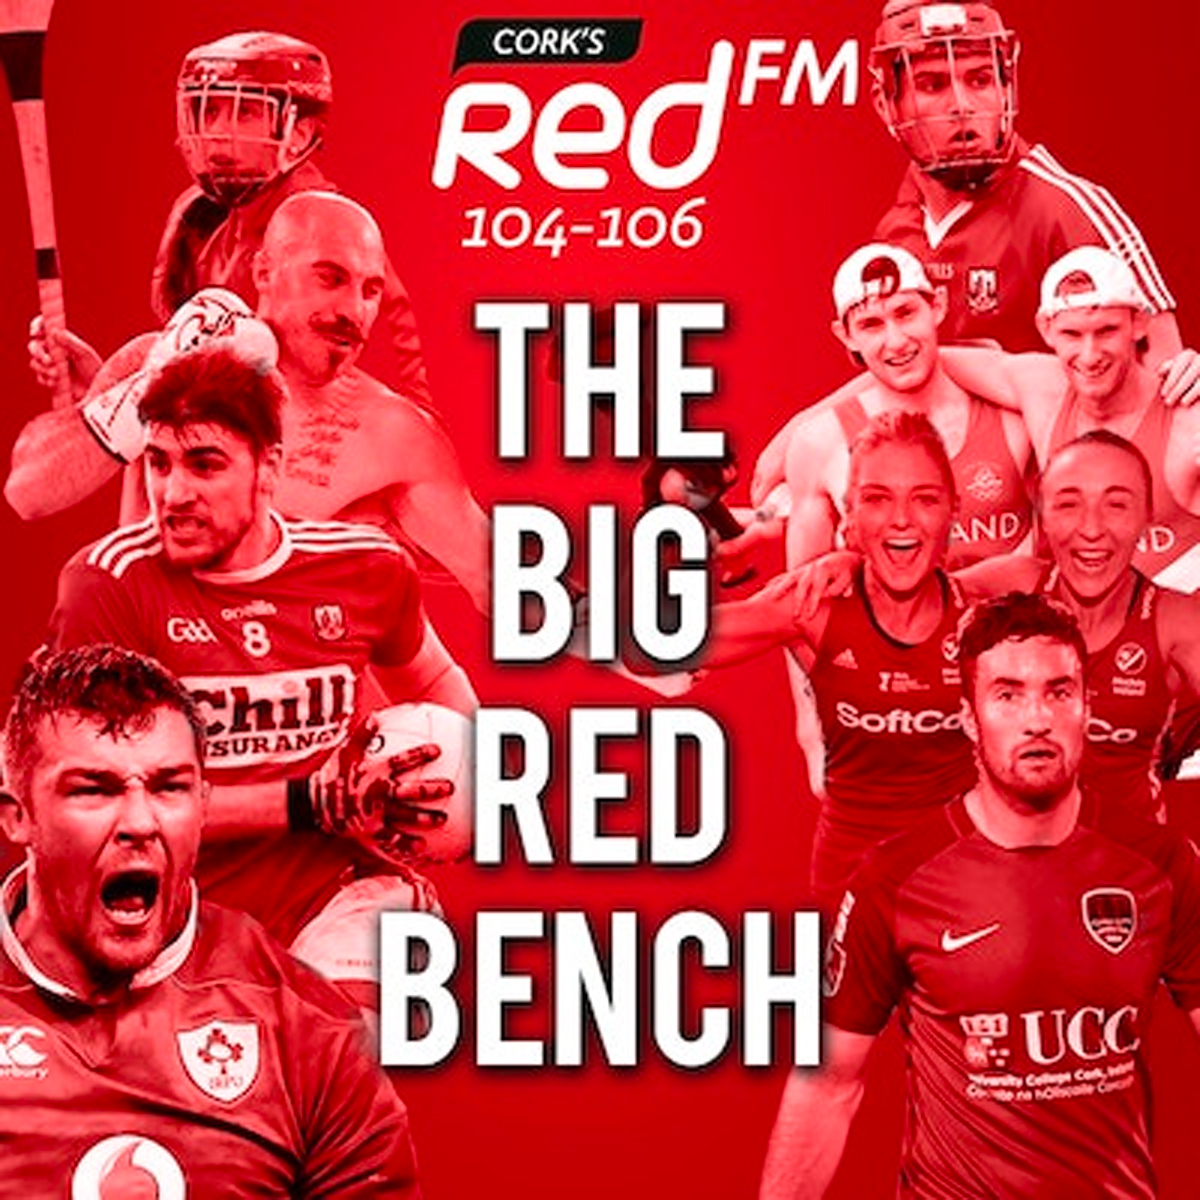 The Big Red Bench